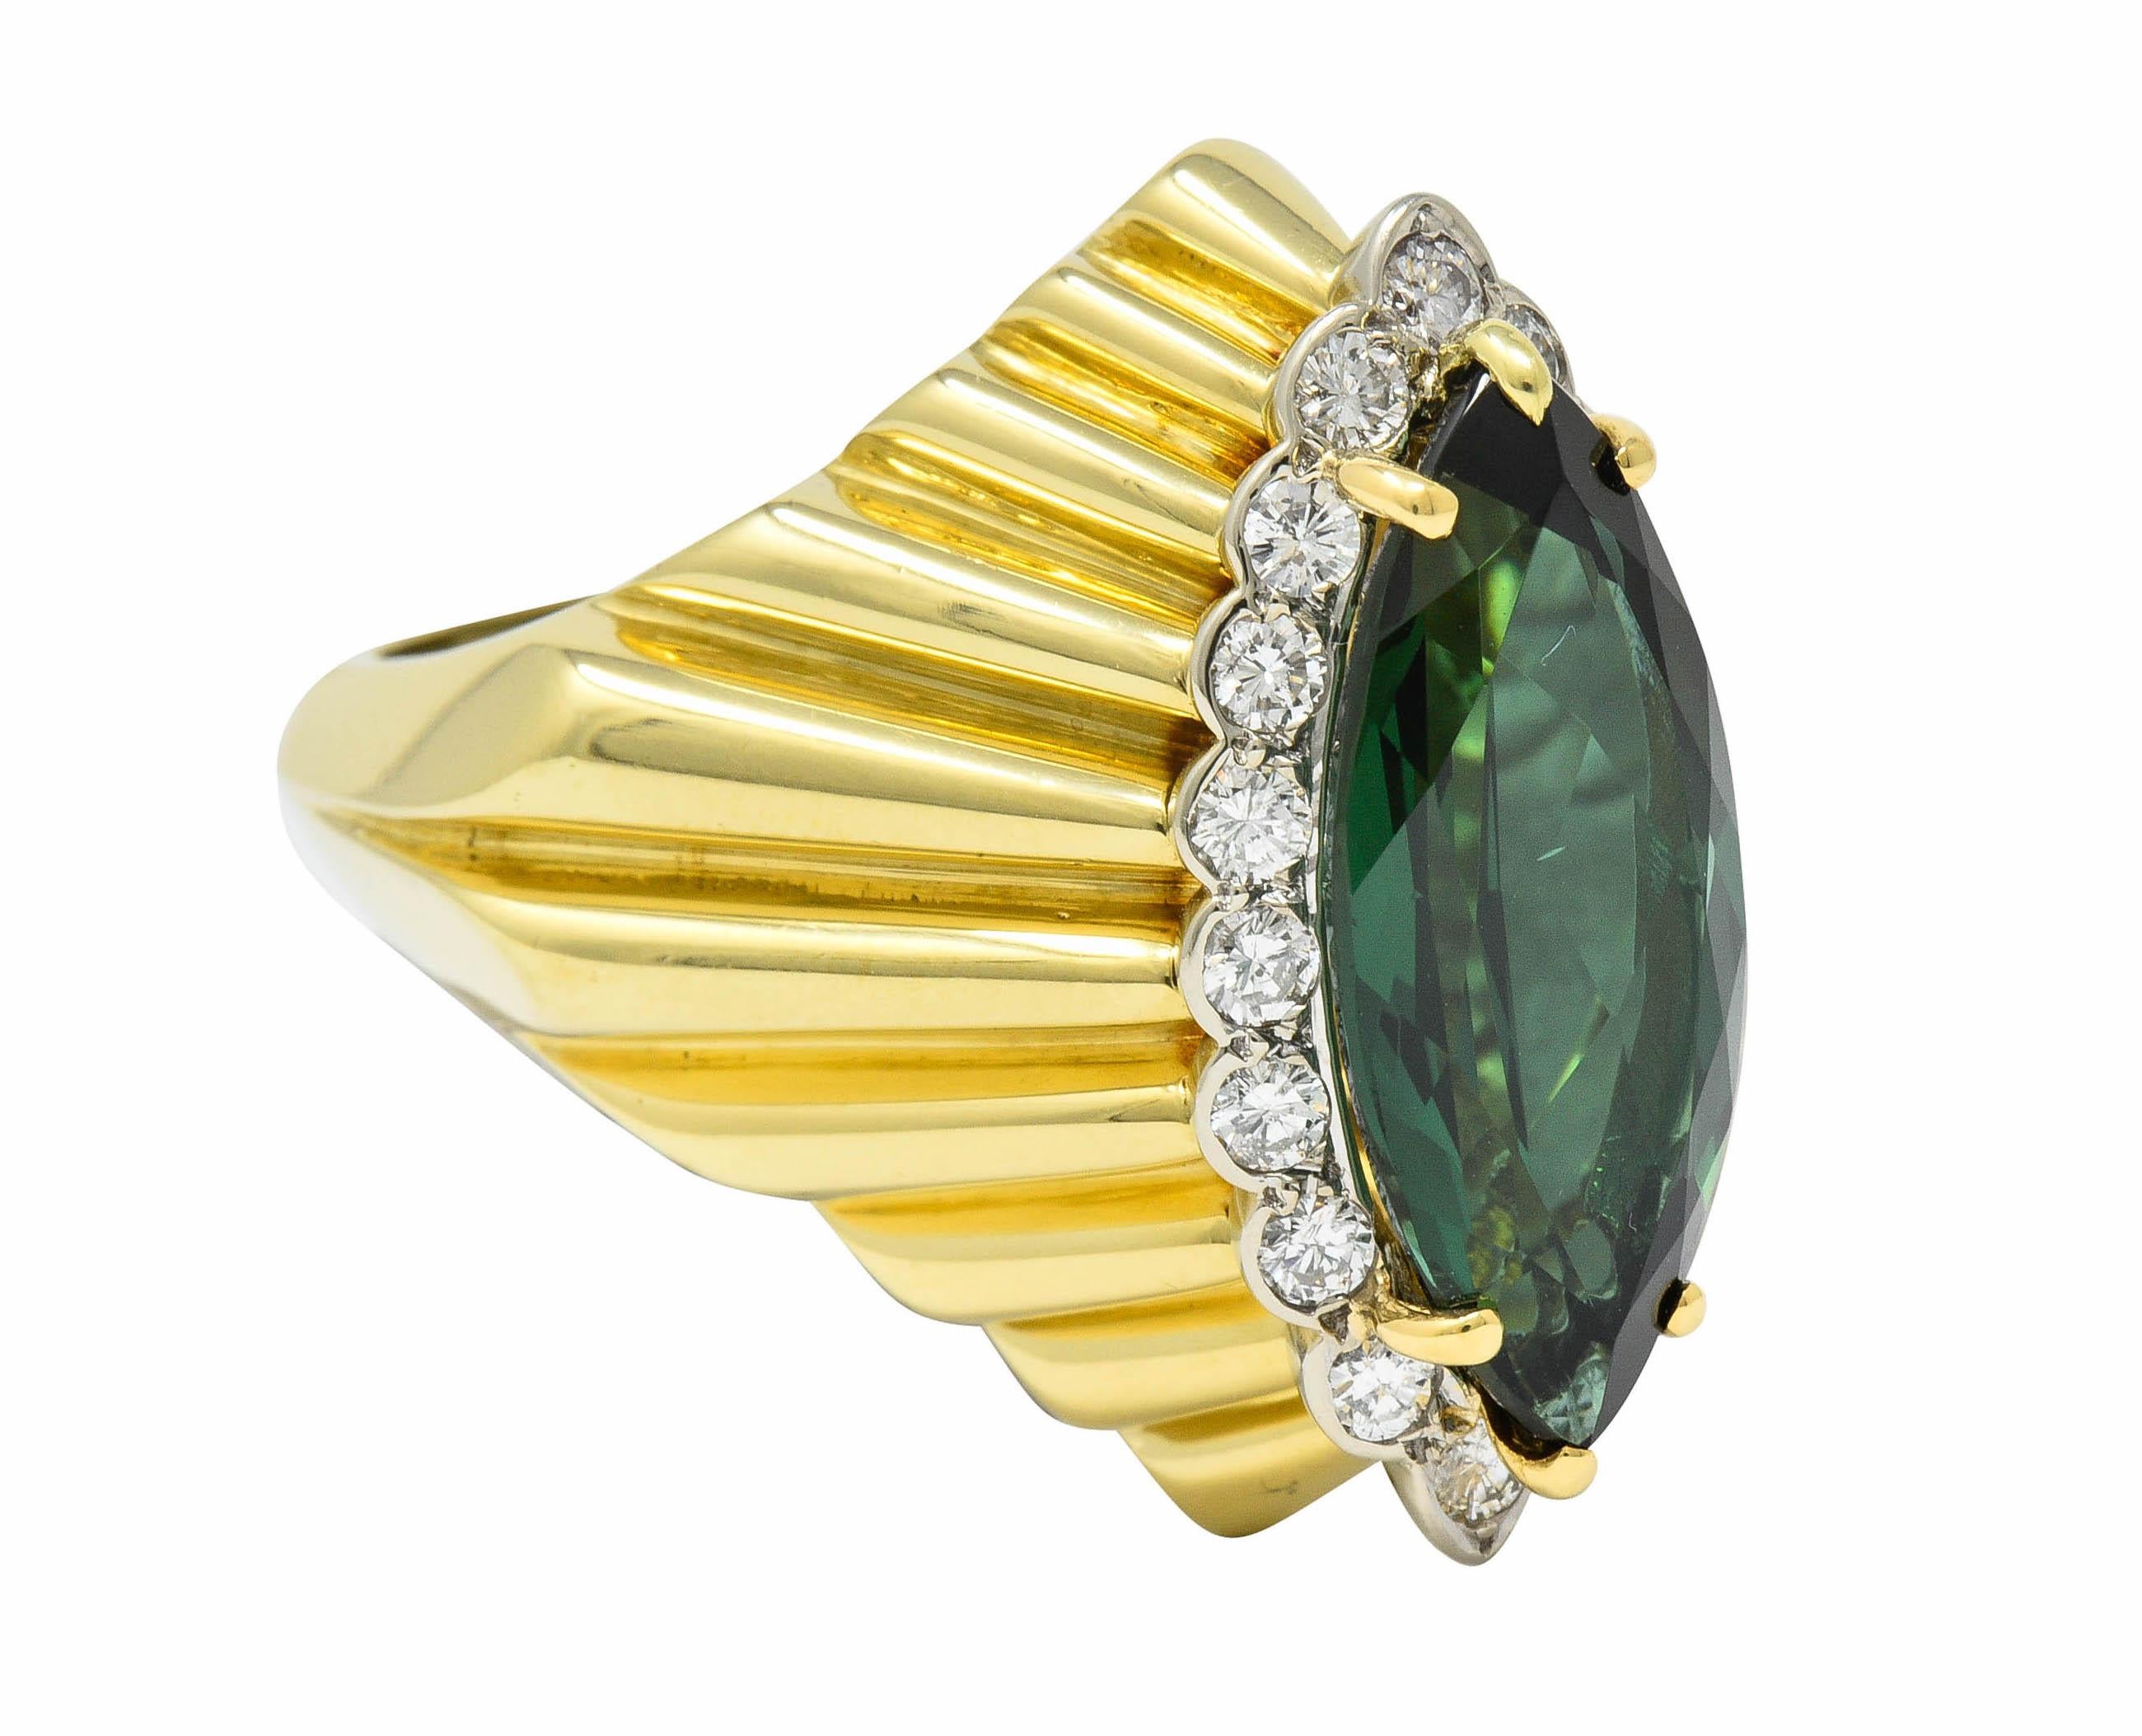 Incredibly dynamic mounting designed as a radiating linear motif

Centering a marquise cut tourmaline weighing approximately 6.70 carats; medium-dark green in color

Surrounded by a halo of round brilliant cut diamonds weighing in total